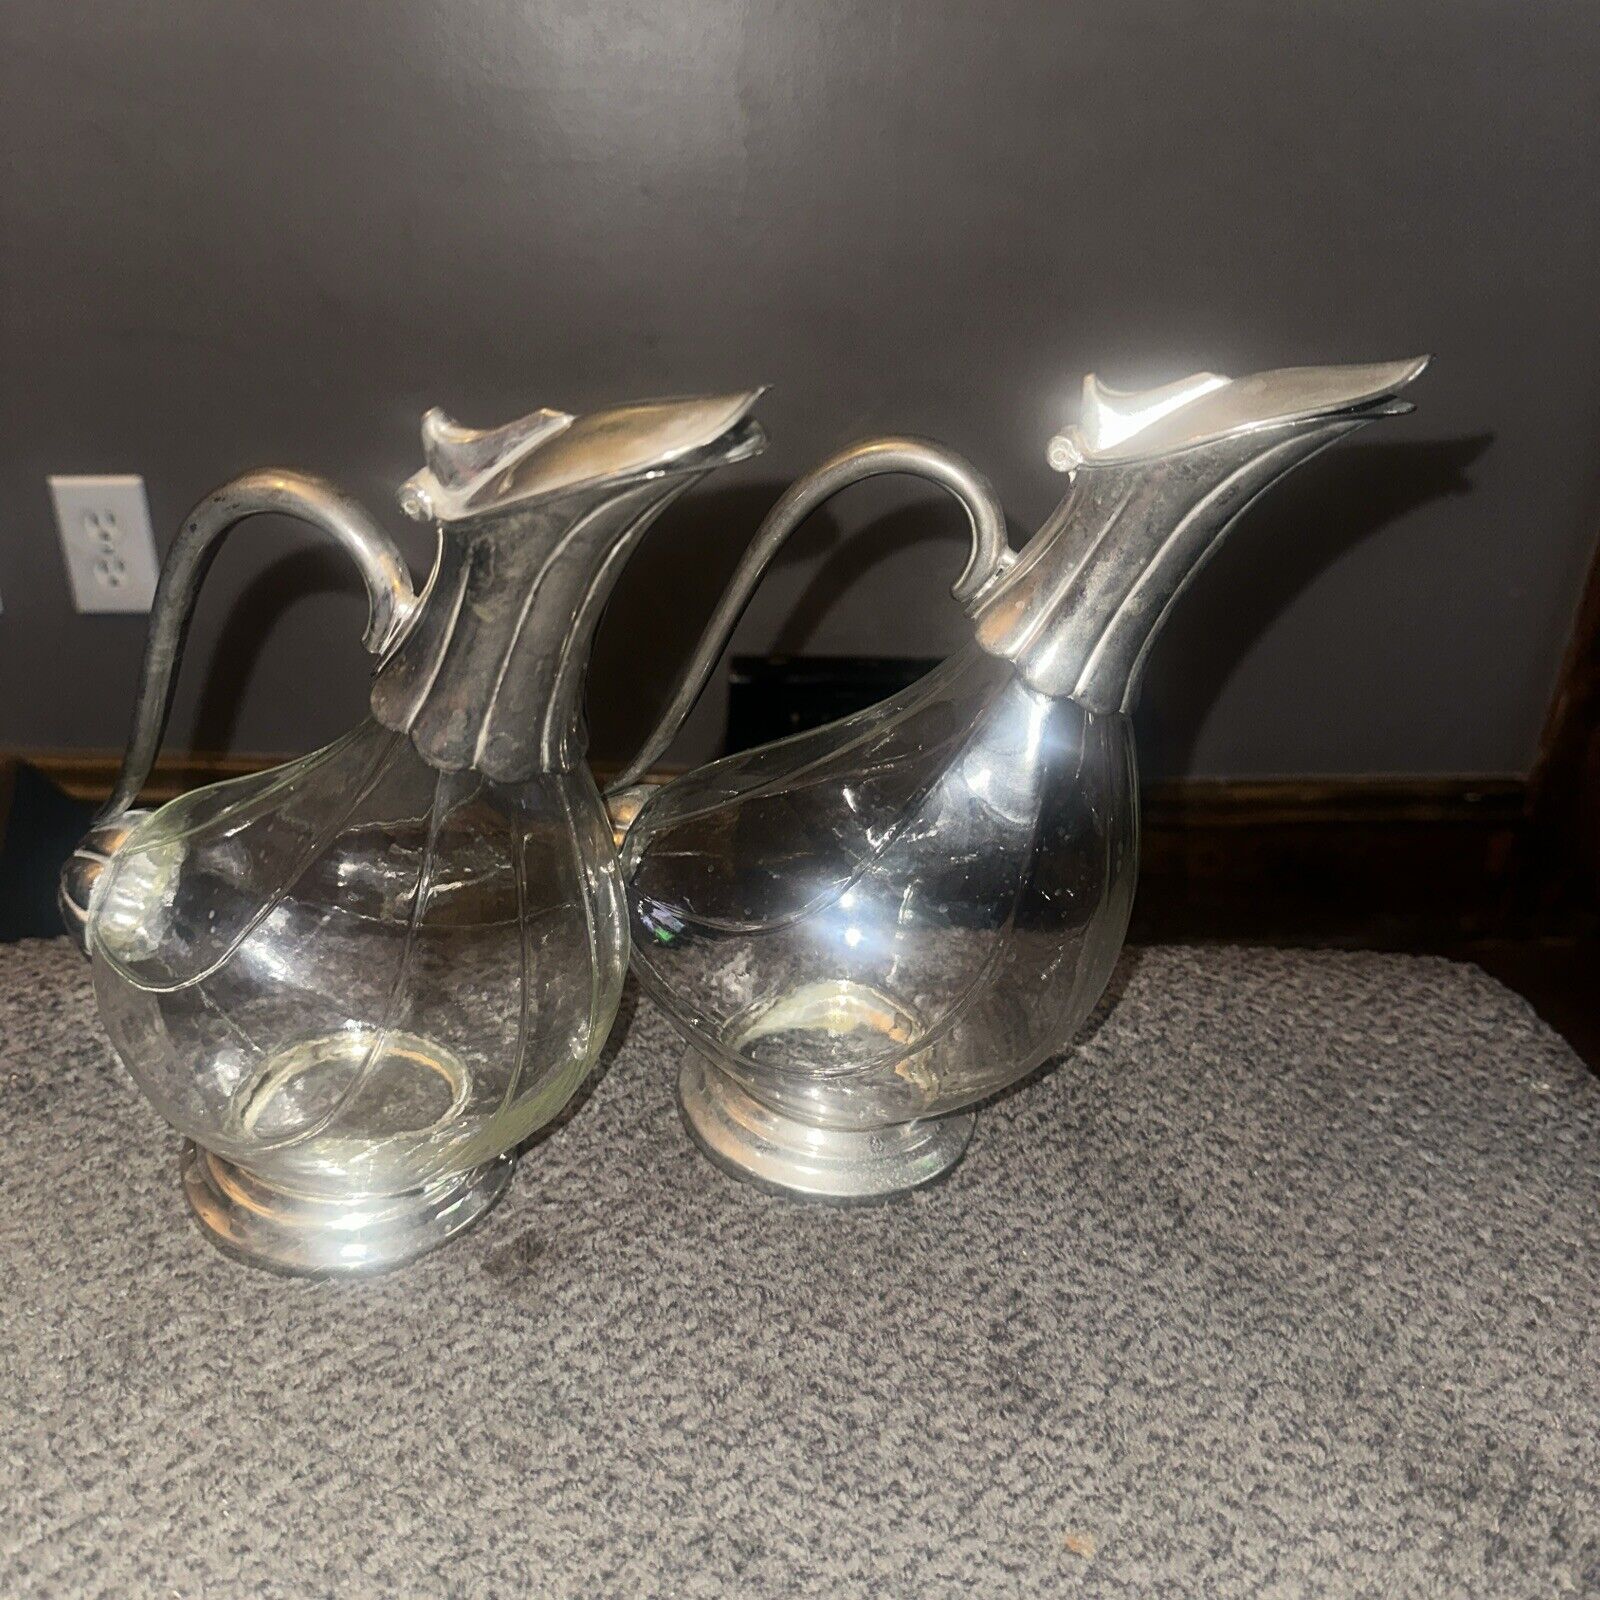 ECLECTIC Pair Clear Glass and Silver-Plated Duck Wine/Claret Decanter - VINTAGE